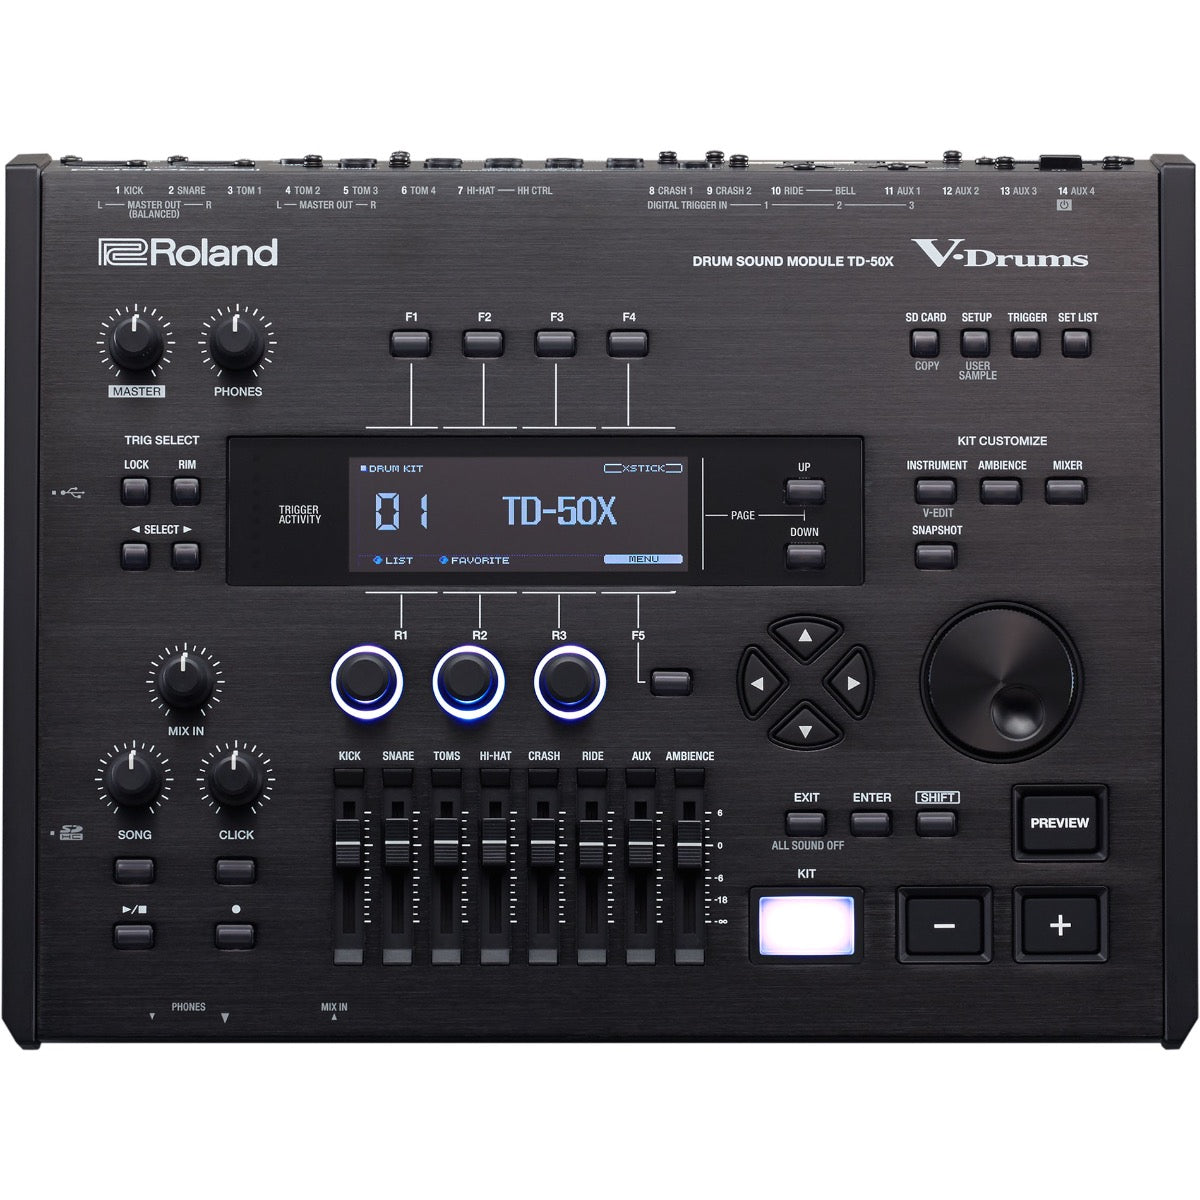 Top view of Roland TD-50X V-Drums Sound Module